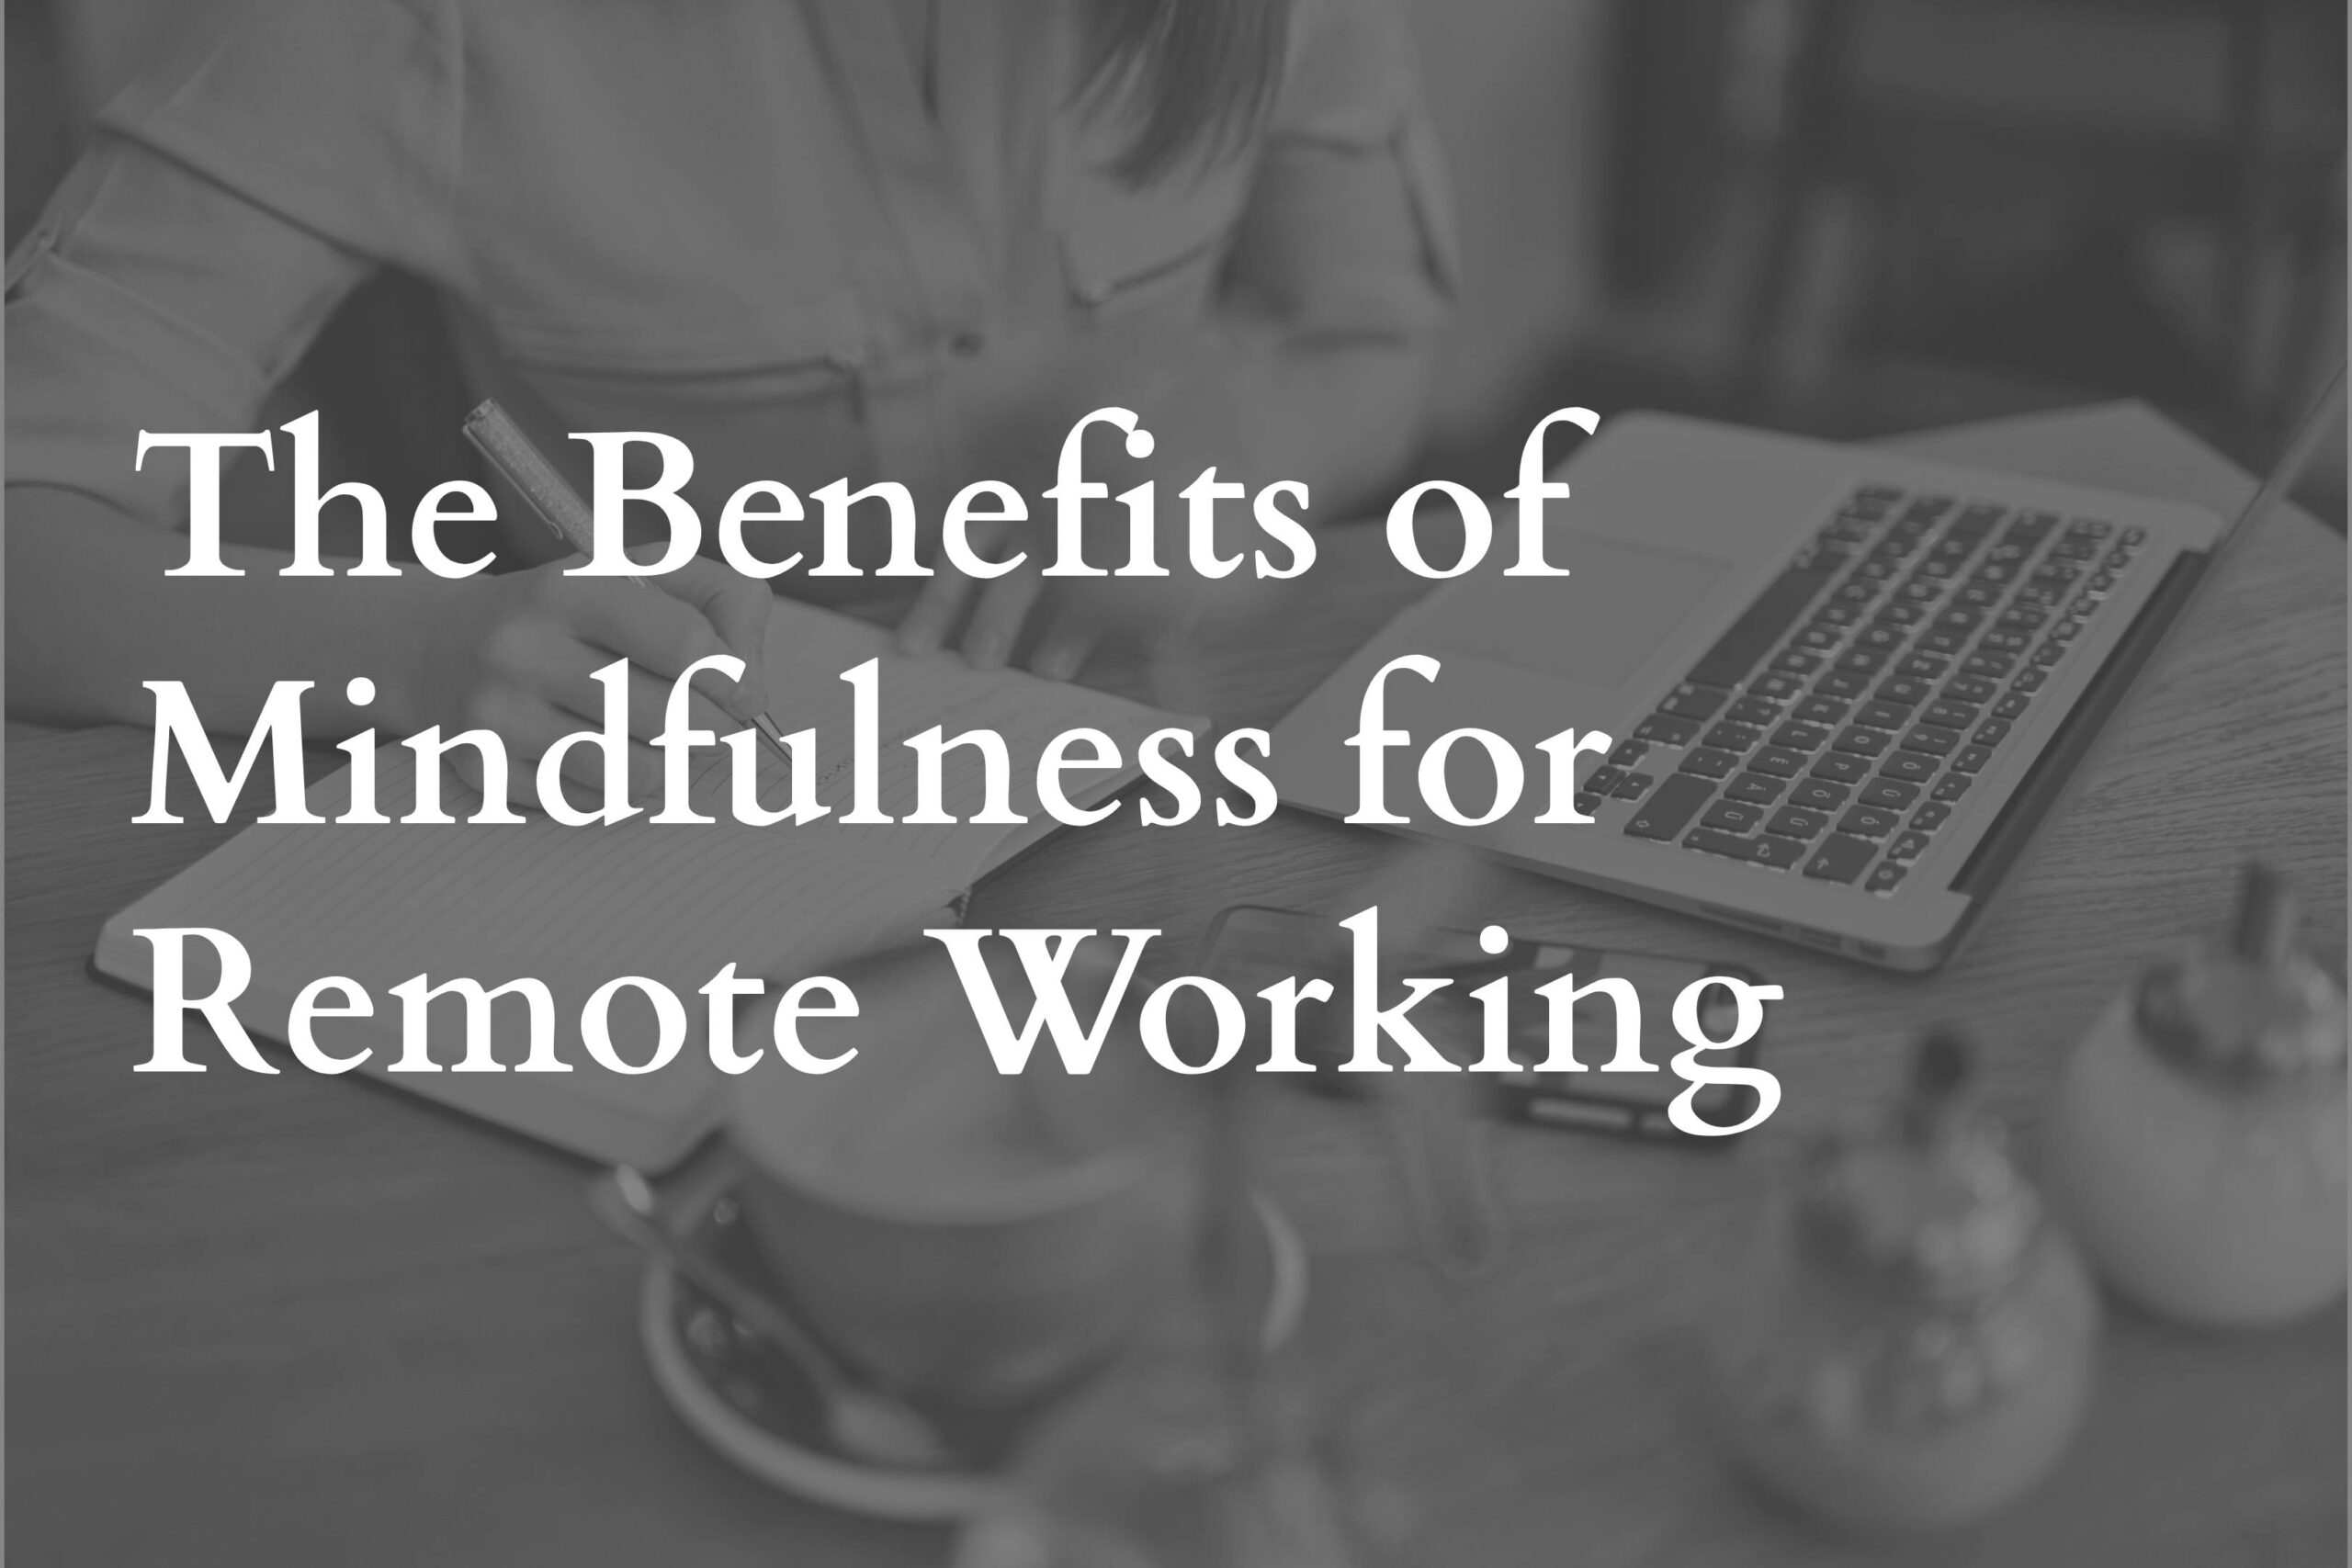 The Benefits of Mindfulness for Remote Working